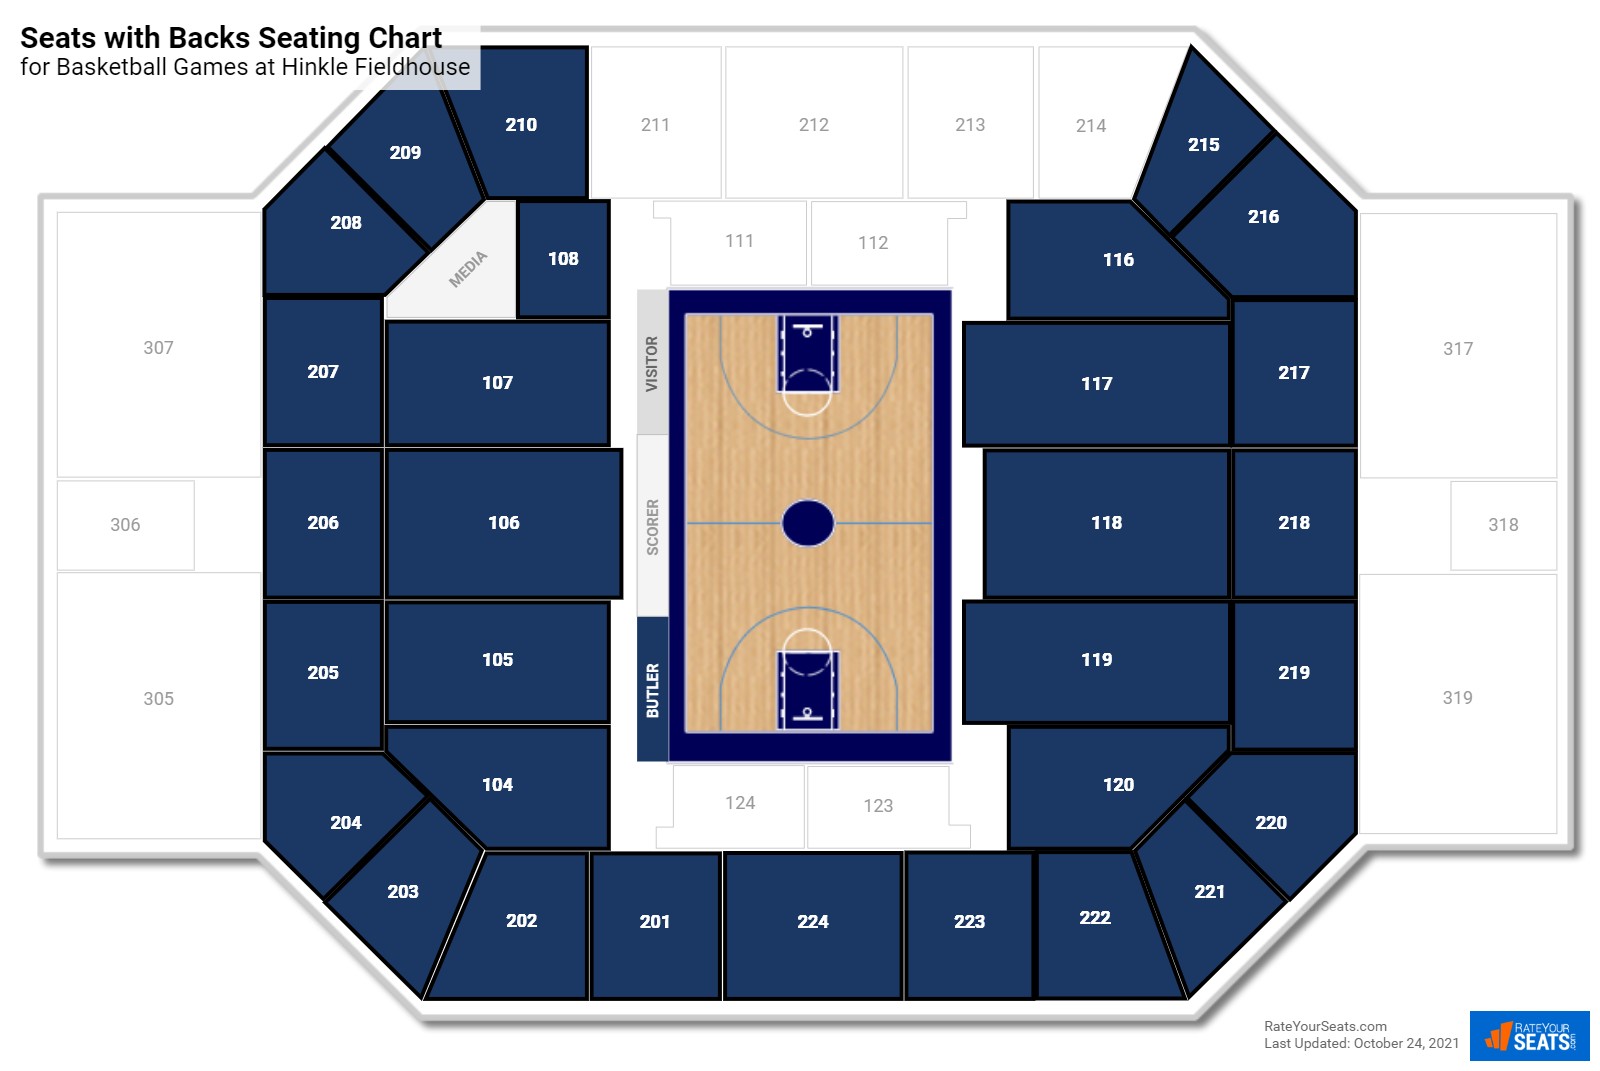 Basketball Seats with Backs Seating Chart at Hinkle Fieldhouse